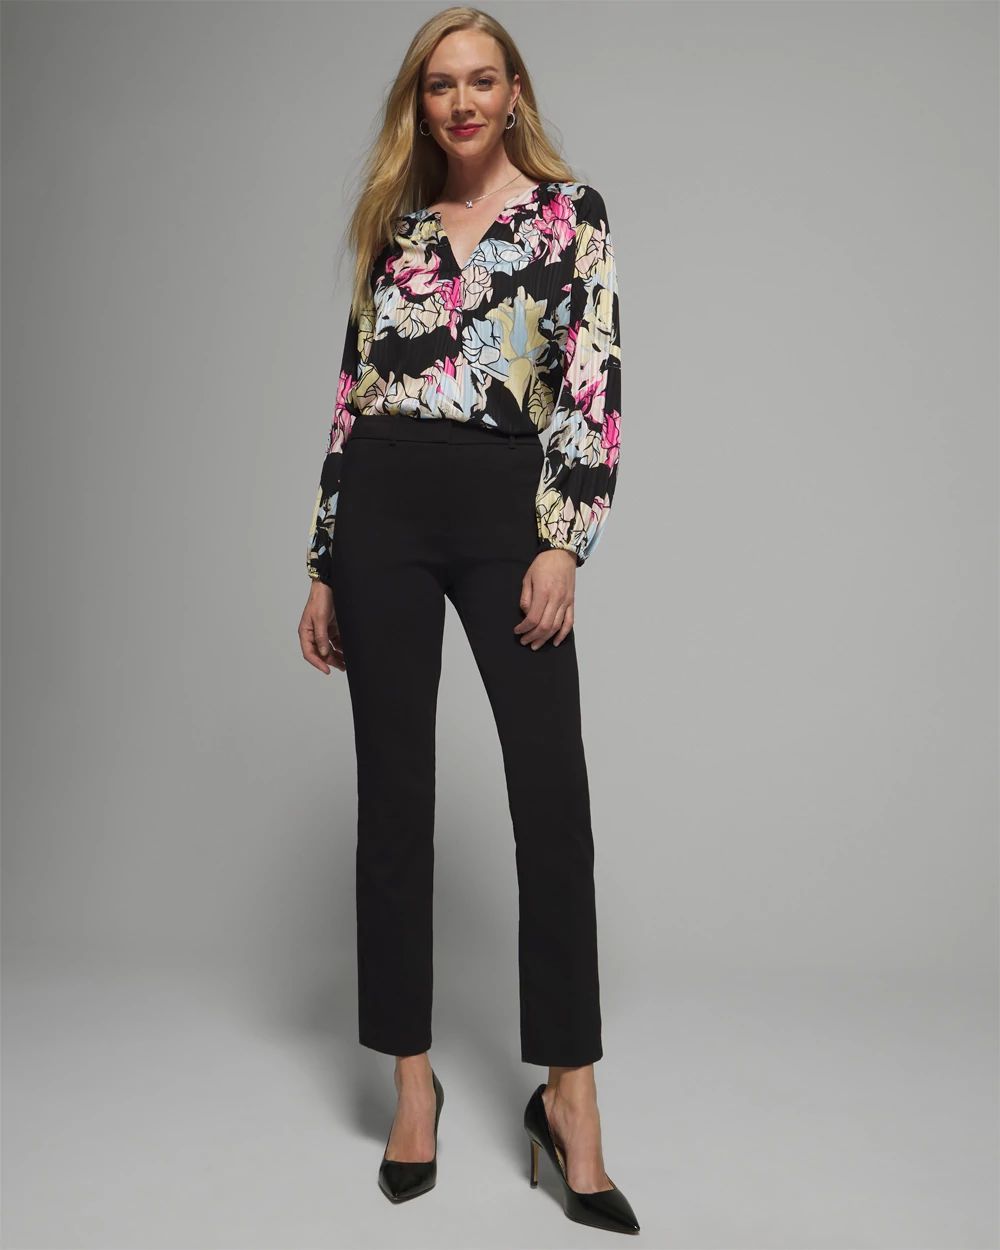 Outlet WHBM The Slim Ankle Pant